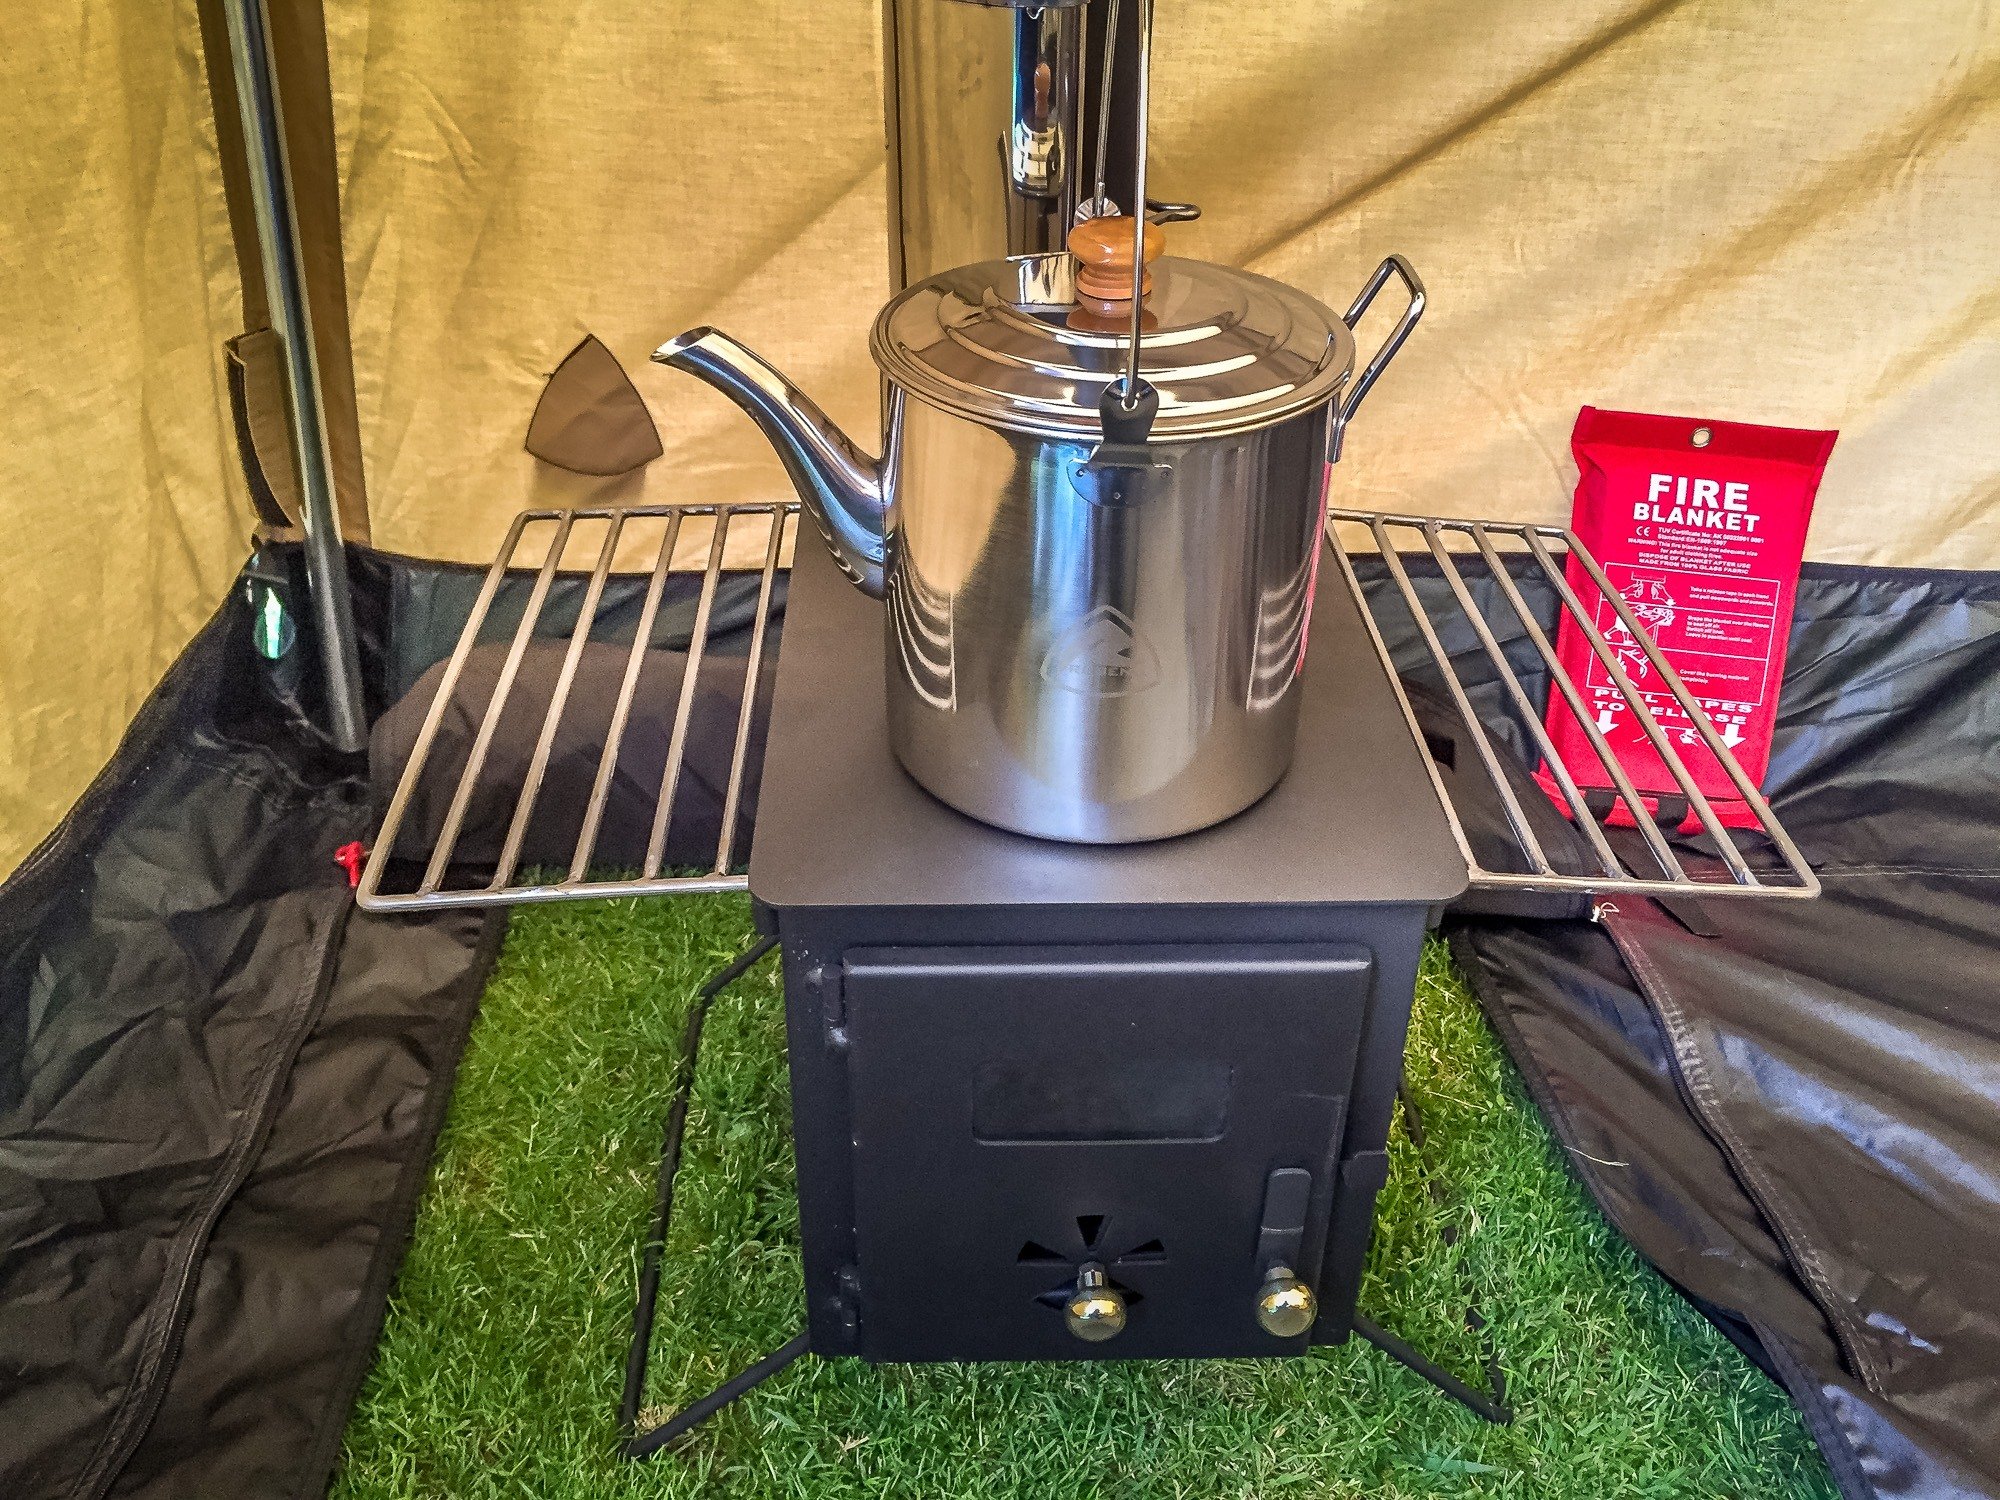 The White River Camping Kettle